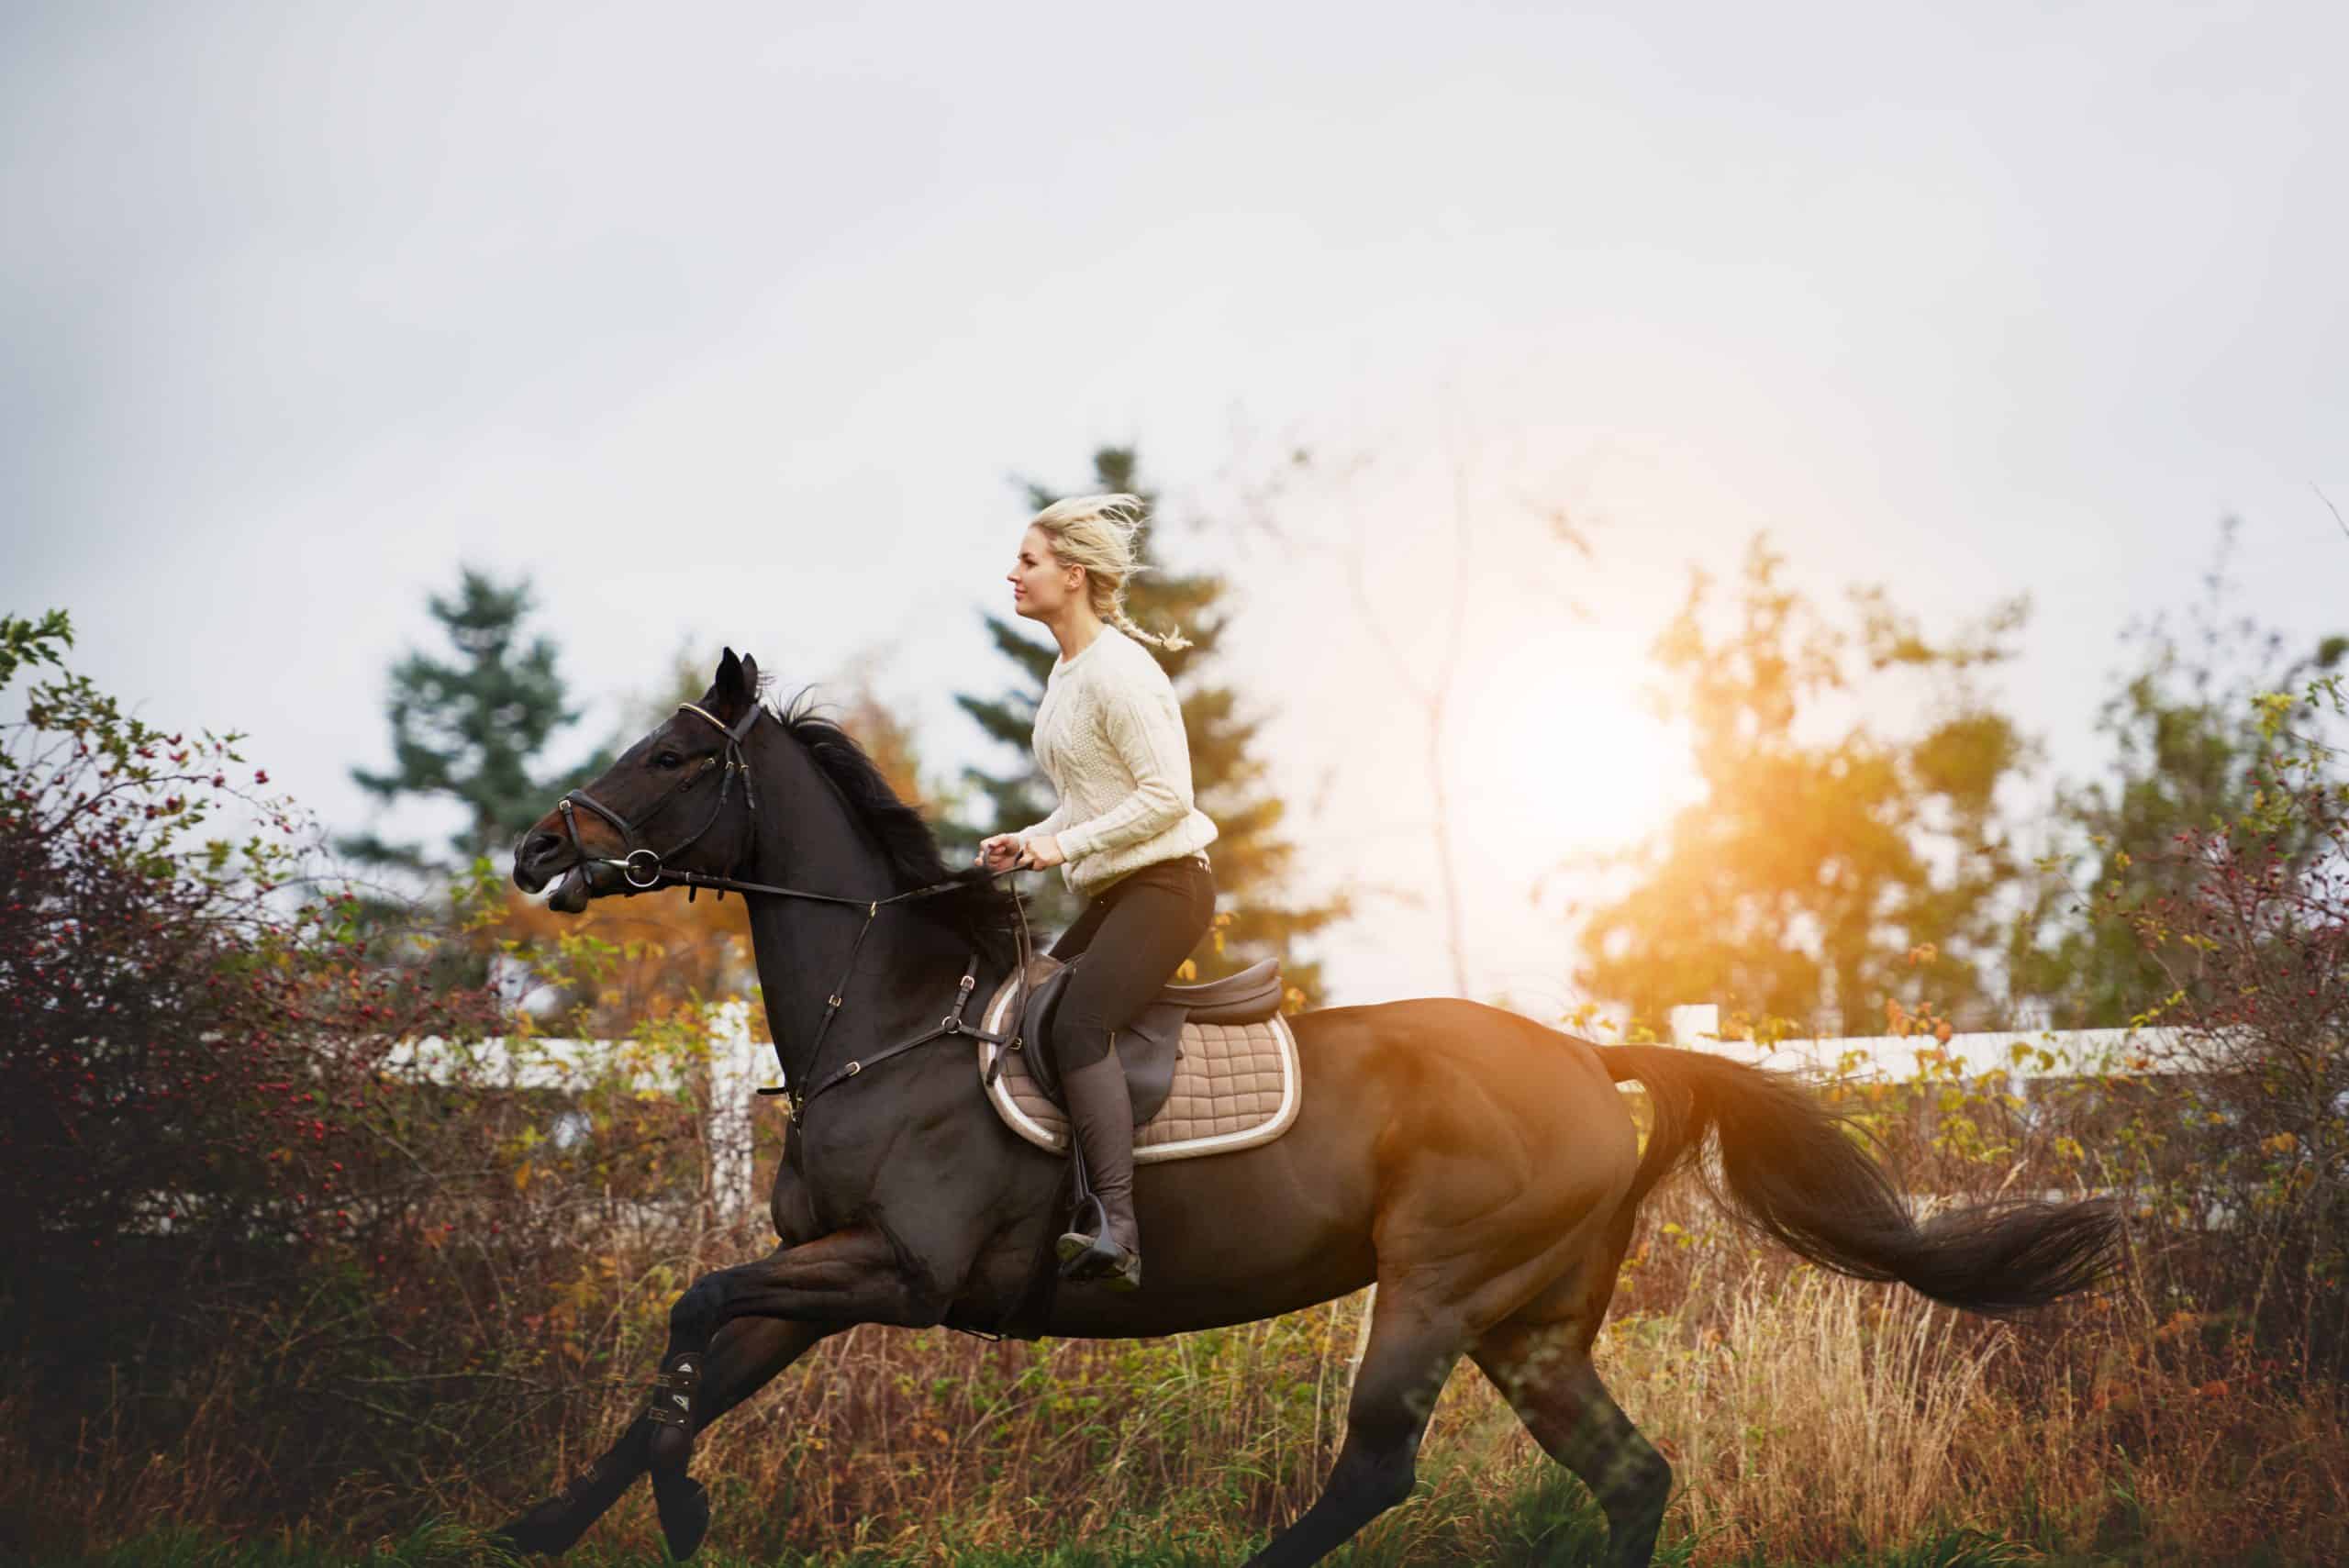 Young woman in riding gear galloping her chestnut horse through a field in the countryside in autumn